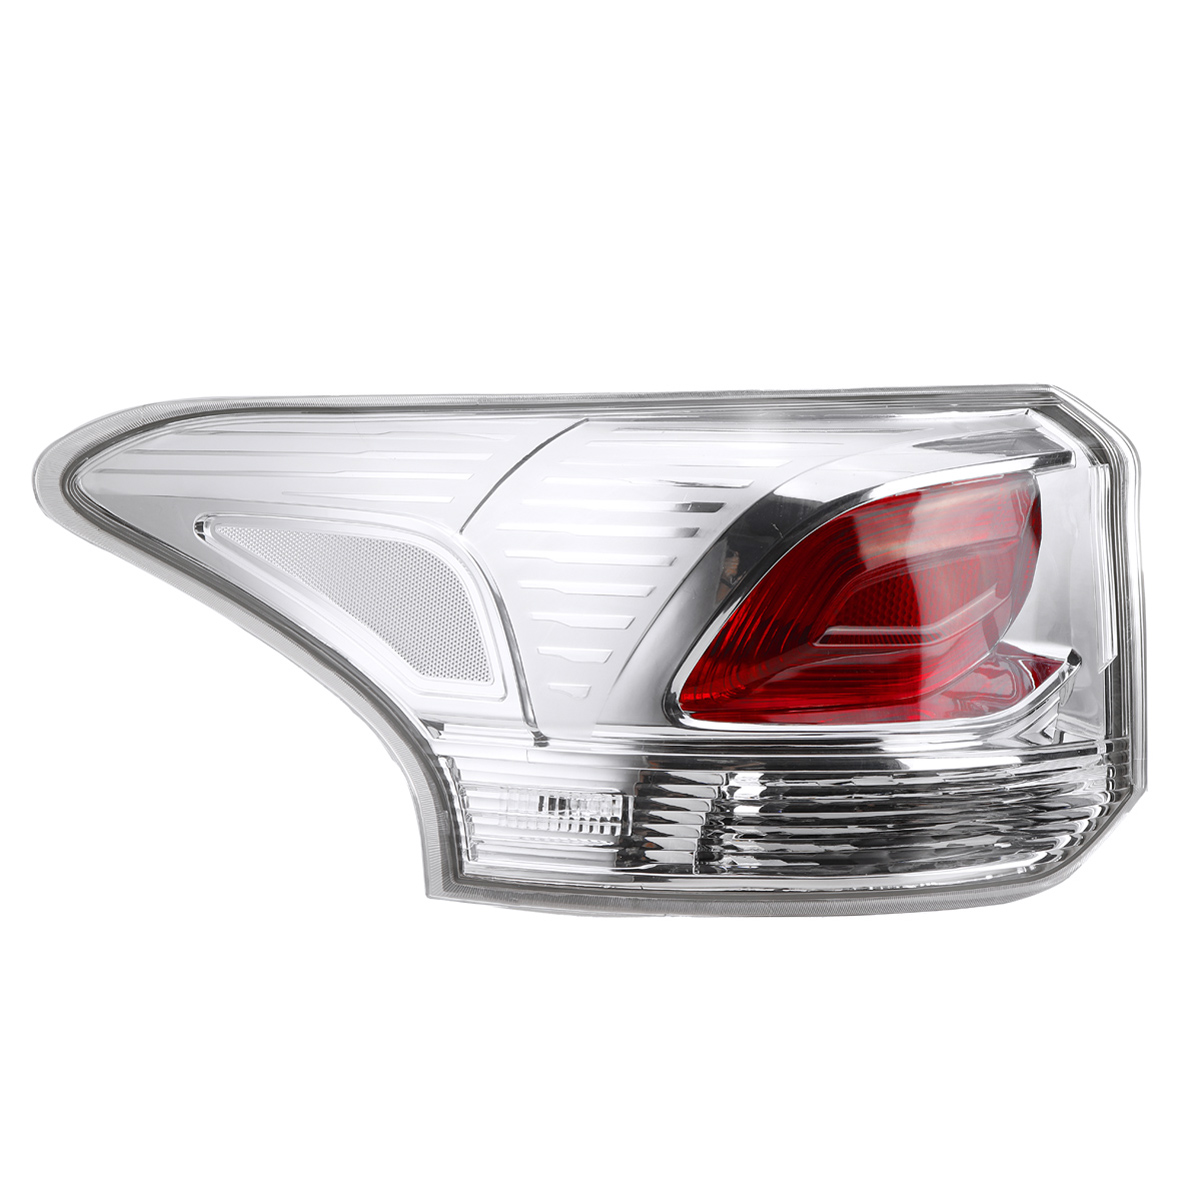 

Car Left/Right Tail Light Brake Lamp With No Bulb For Mitsubishi Outlander 2012-2015